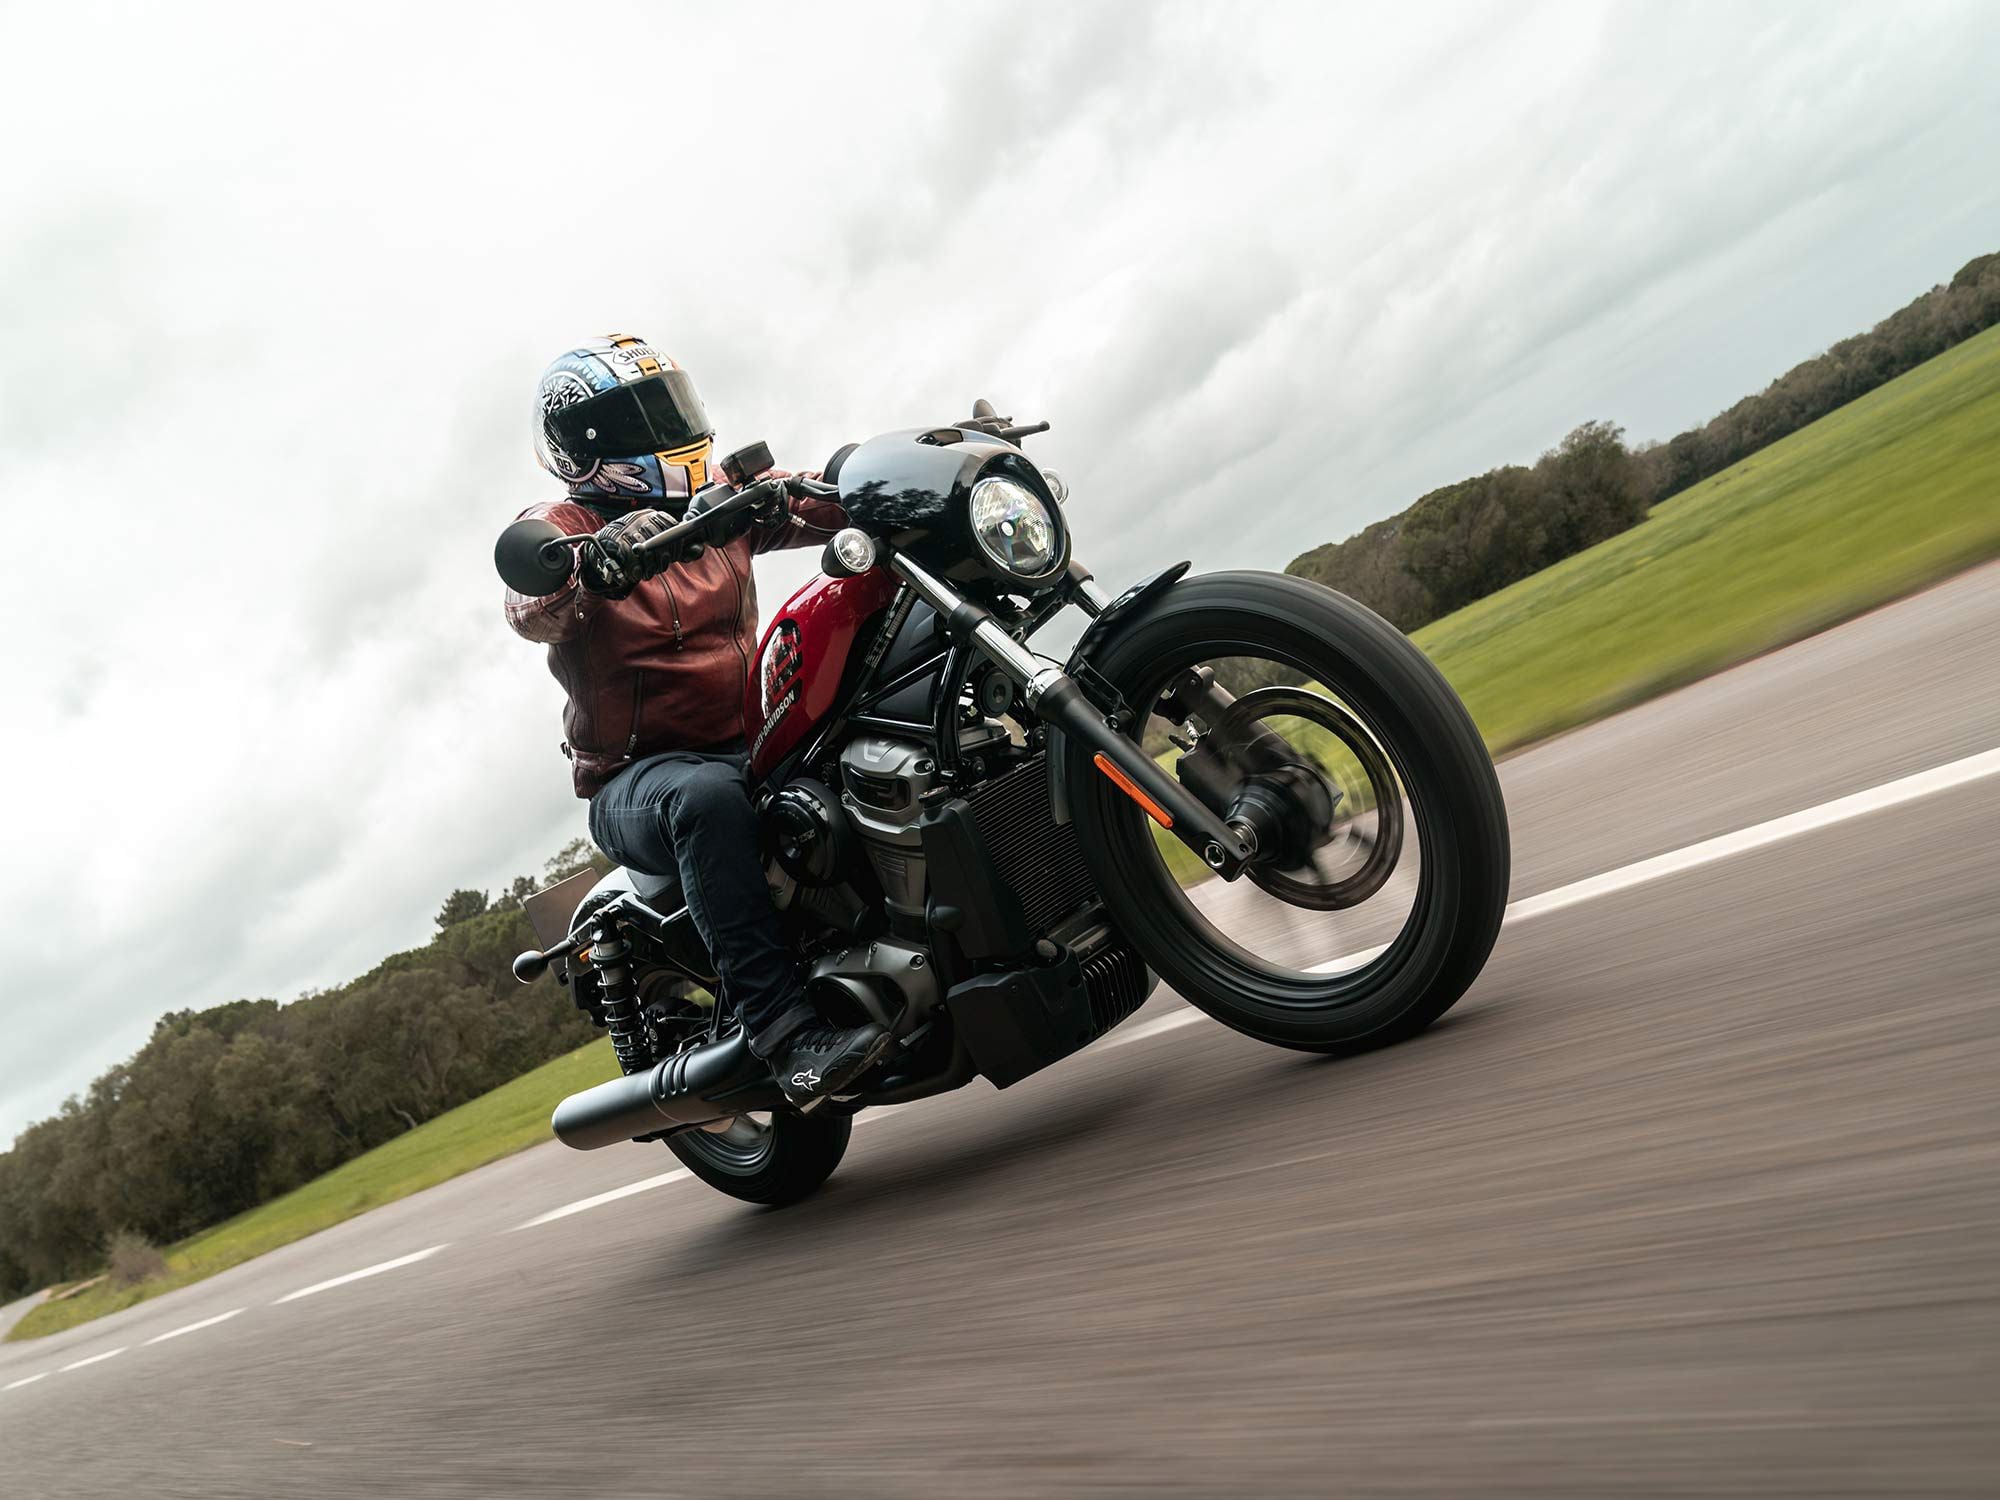 According to Harley, most of the bikes on the test were hitting 120 miles before requiring fuel, and some riders completed the 60-mile ride to lunch with 37 to 45 miles of petrol remaining—but I can’t confirm if the fuel tank was brimmed.